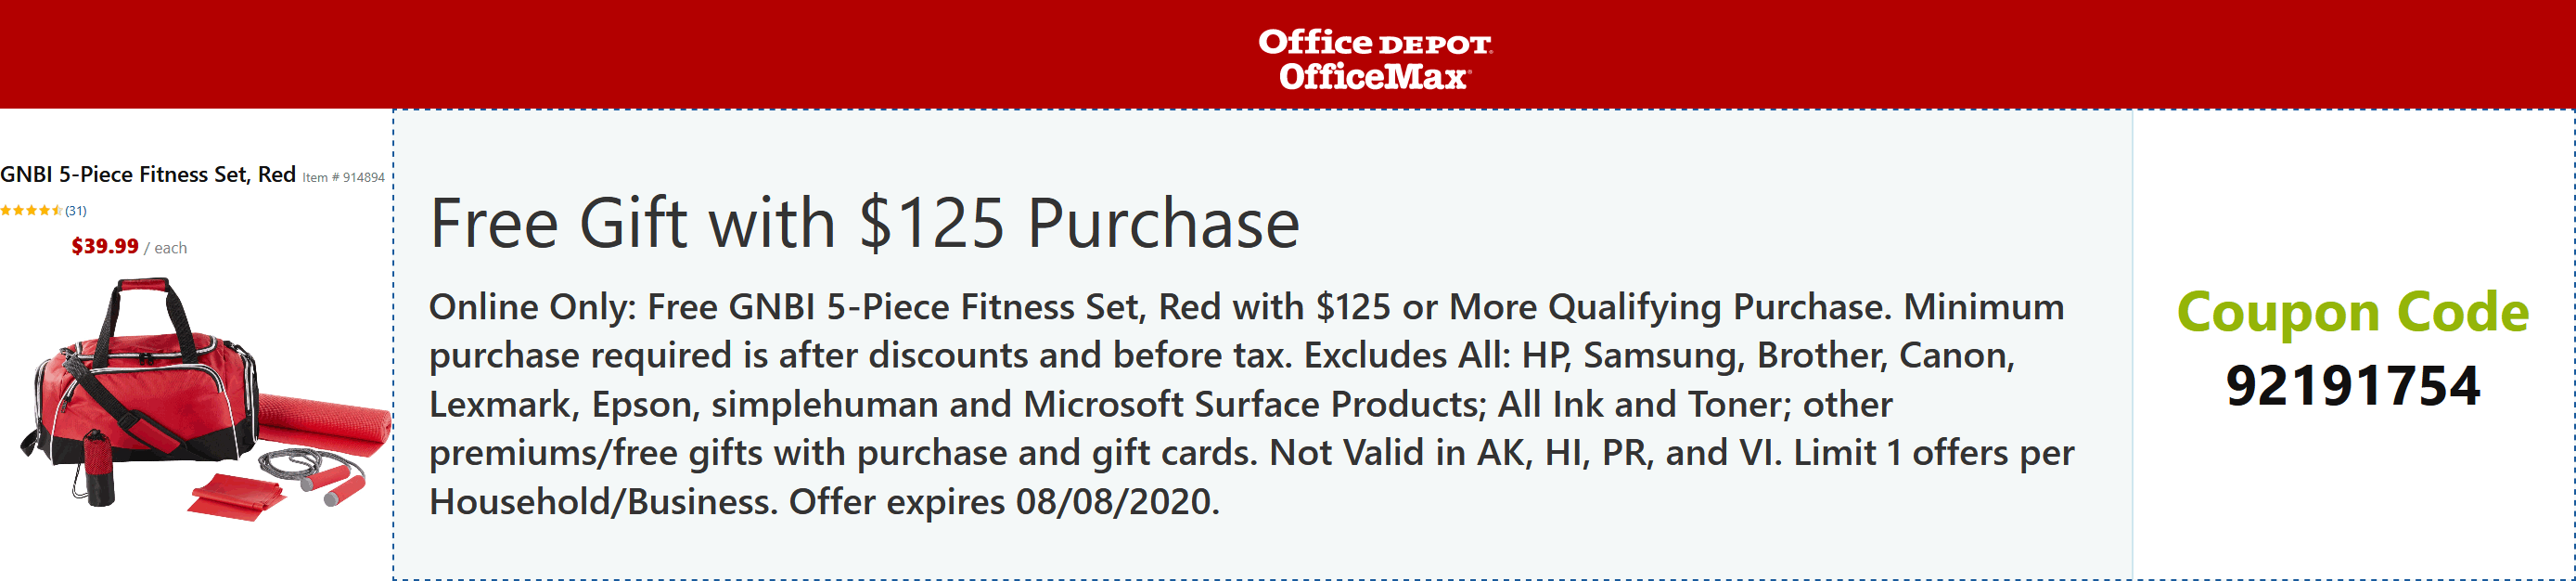 Office Depot stores Coupon  $40 workout gear free with $125 spent at Office Depot via promo code 92191754 #officedepot 